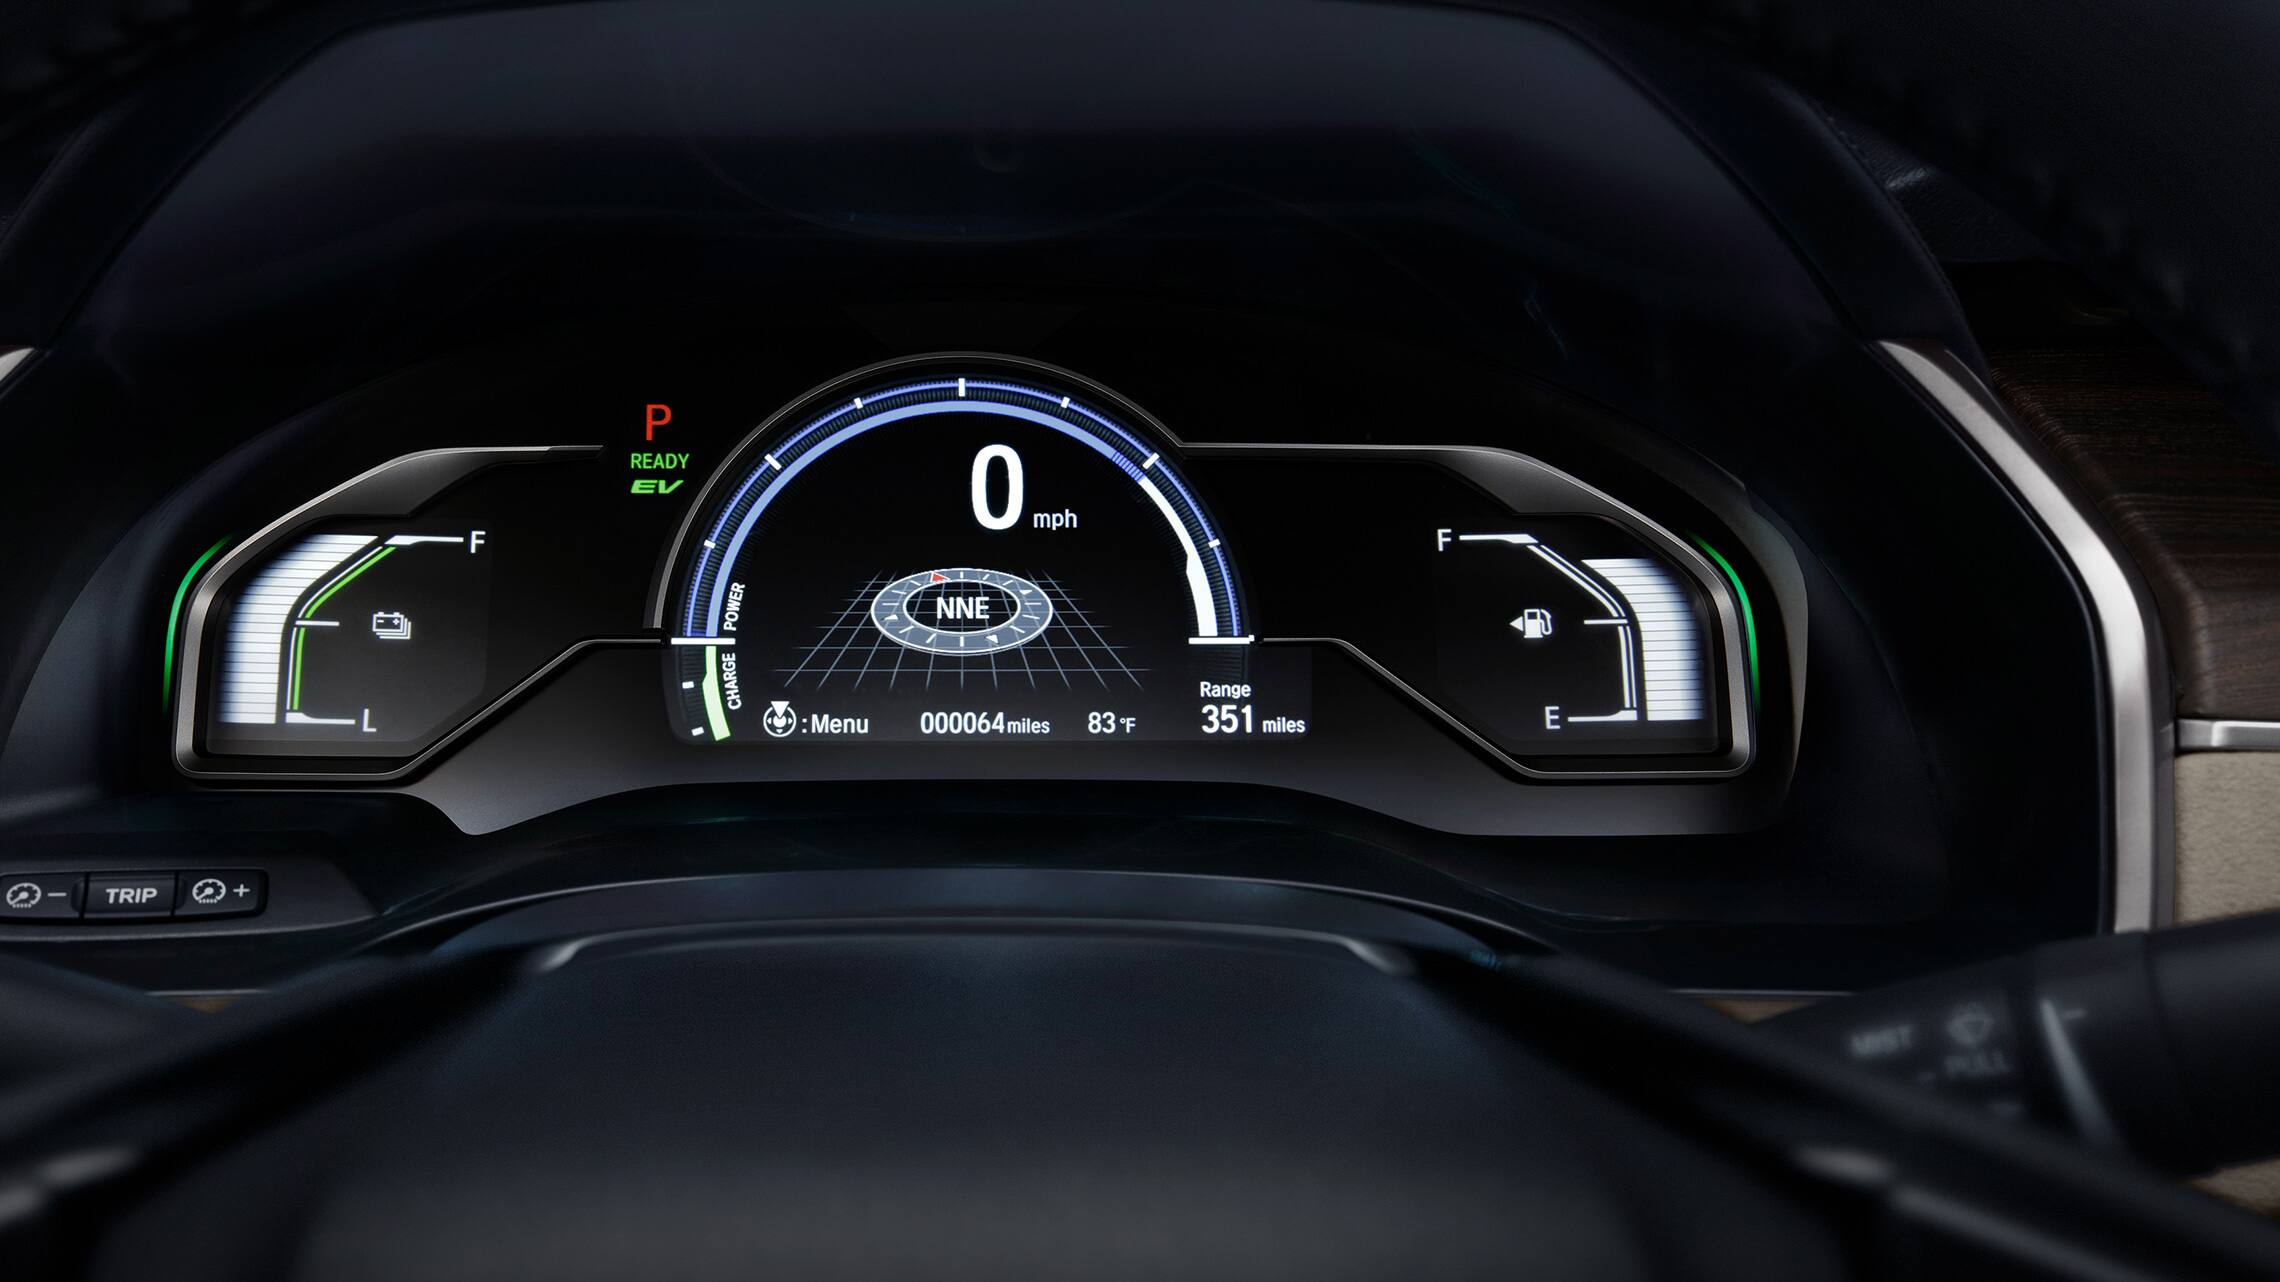 Detail of digital Driver Information Interface in 2021 Clarity Plug-In Hybrid.